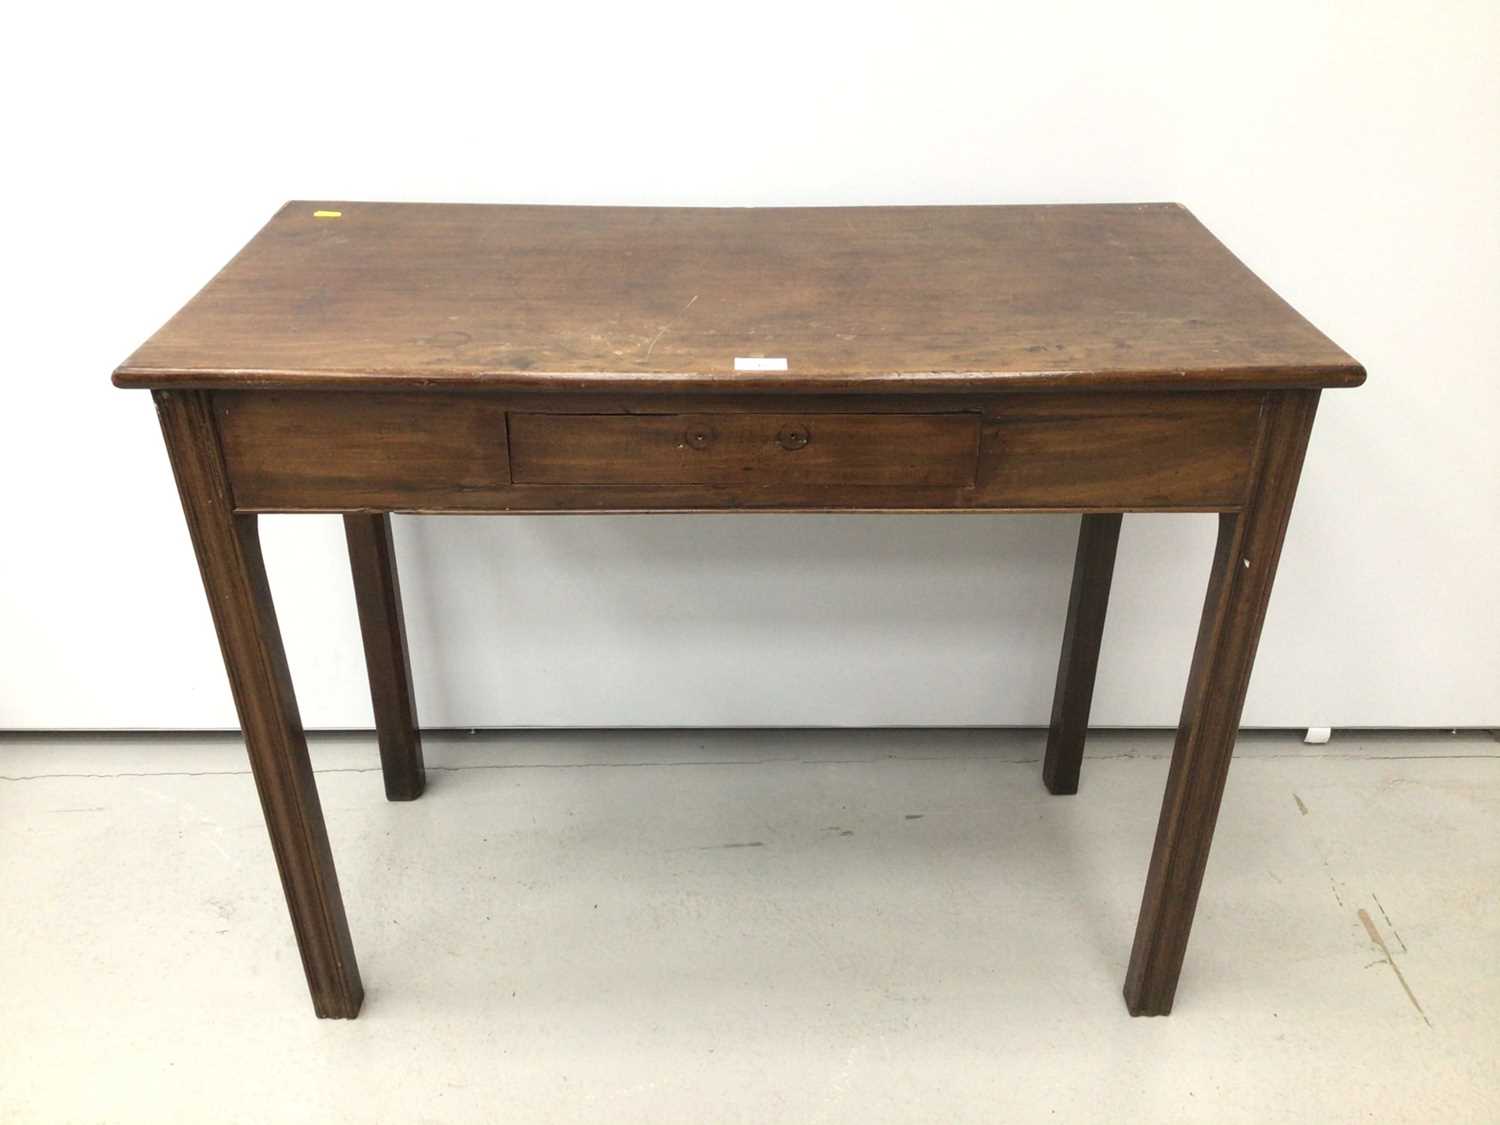 Lot 42 - 19th century mahogany side table, altered from a tea table